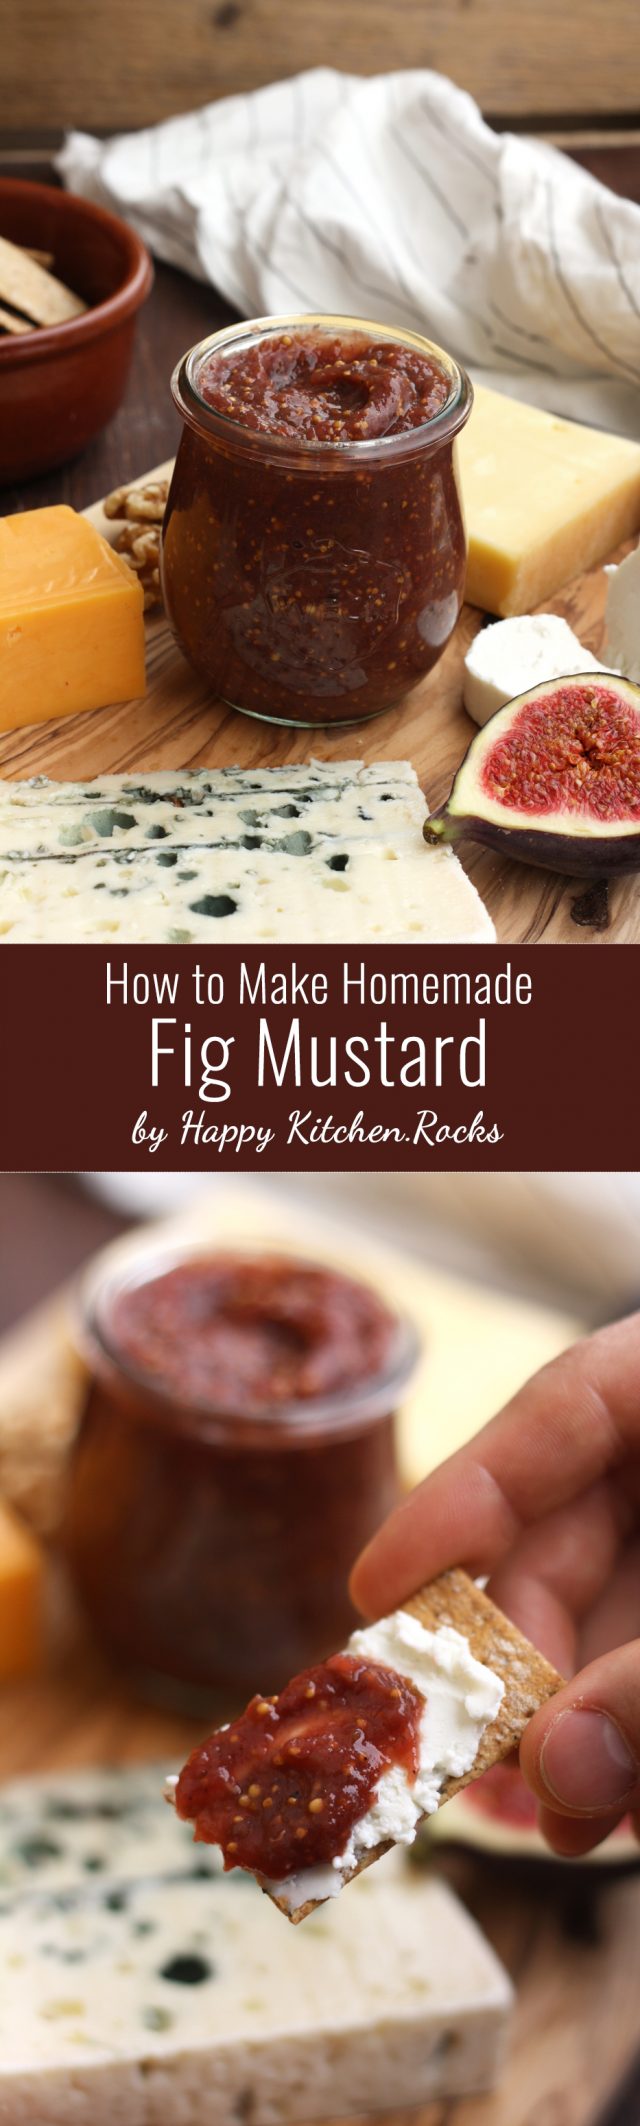 Easy and delicious gourmet fig mustard video recipe ready in just 30 minutes. Great sweet and spicy addition to your cheese plate!